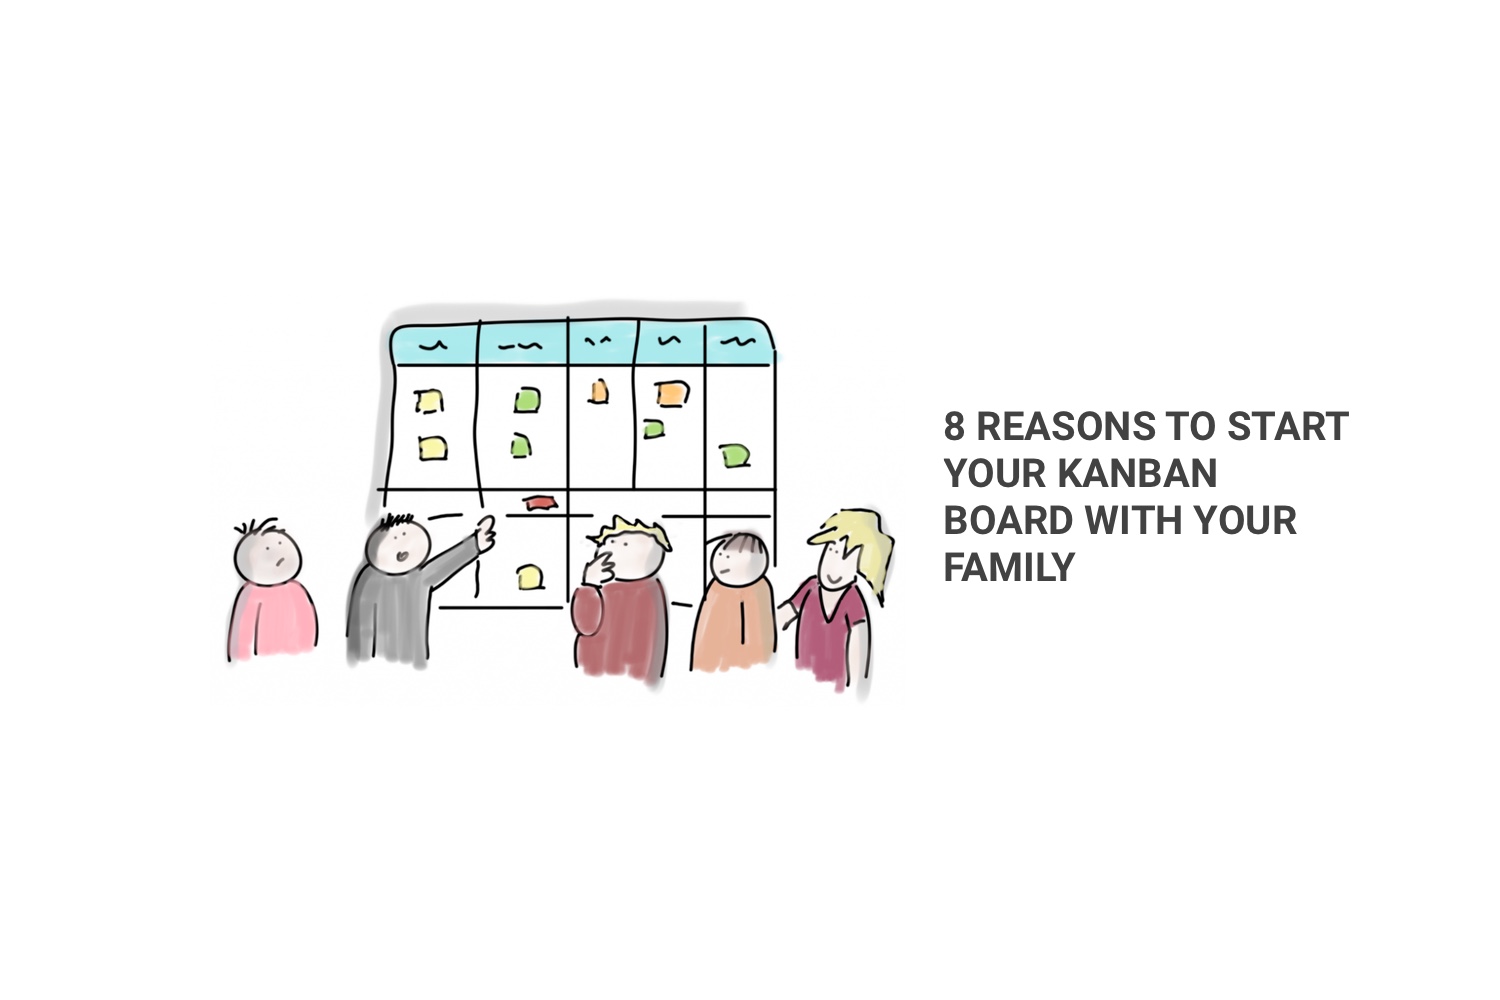 Reasons to consider Physical Kanban Board by pmxboard